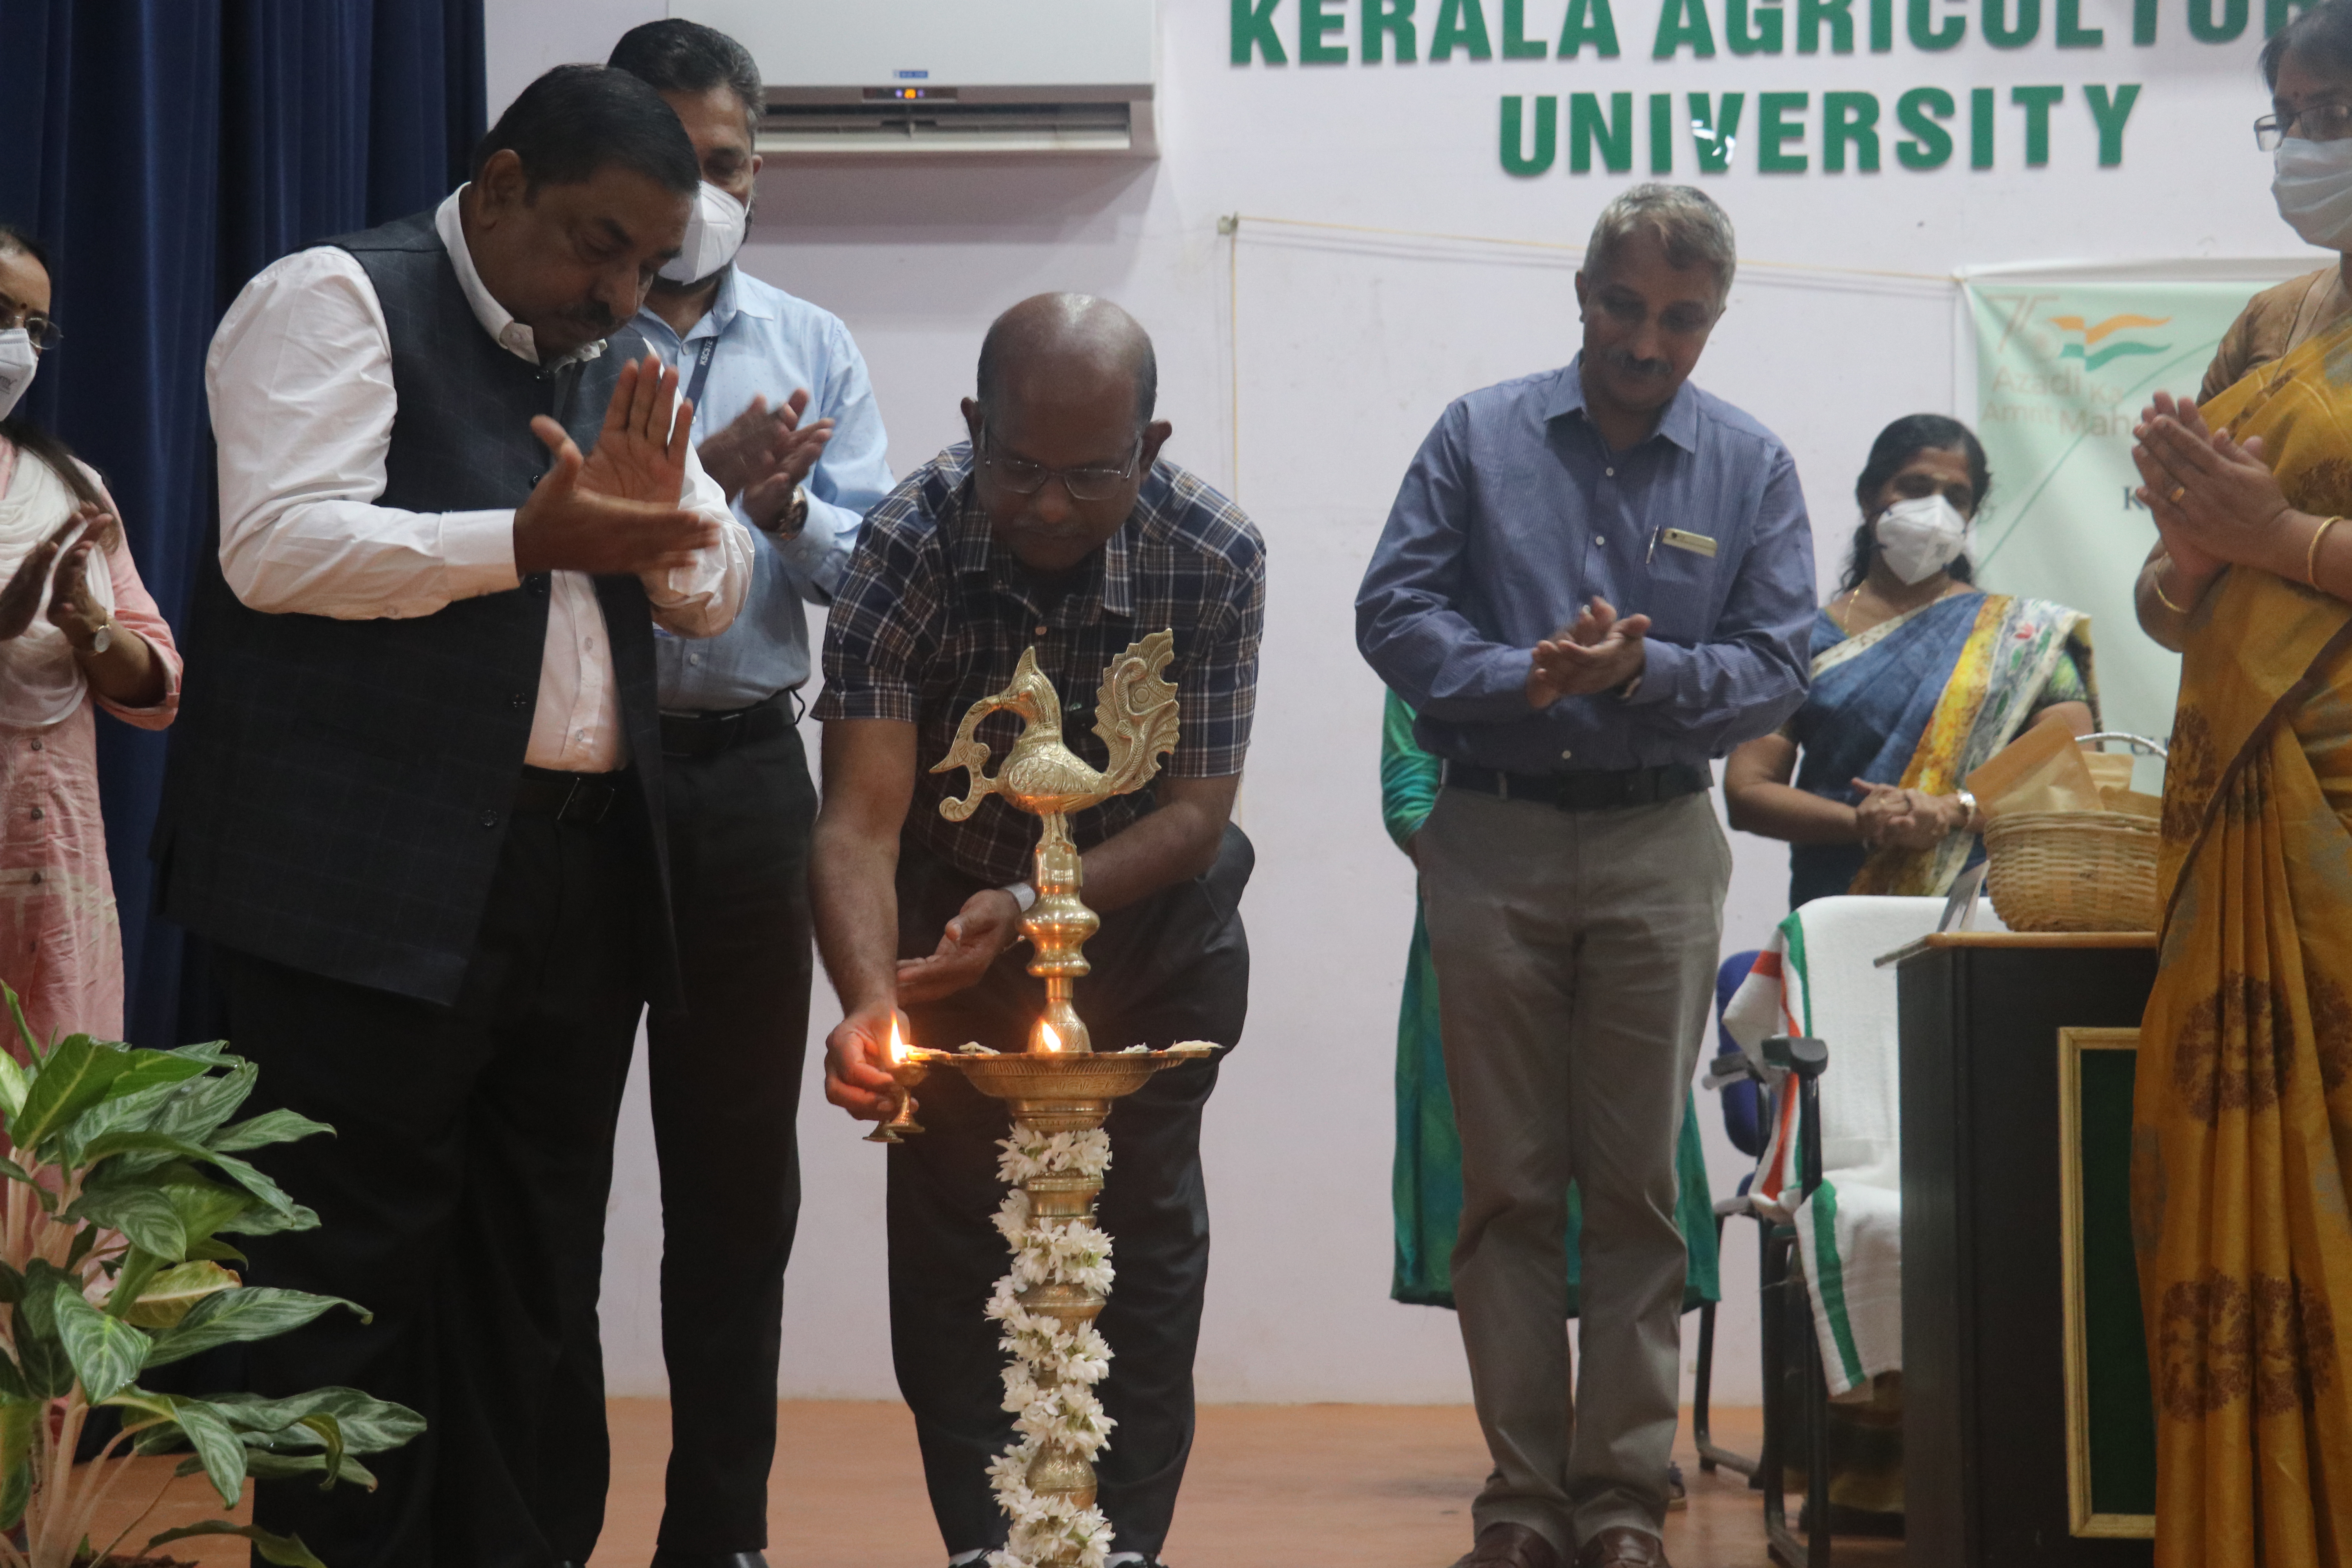 Workshop on Climate Change and its impacts with special reference to Kerala